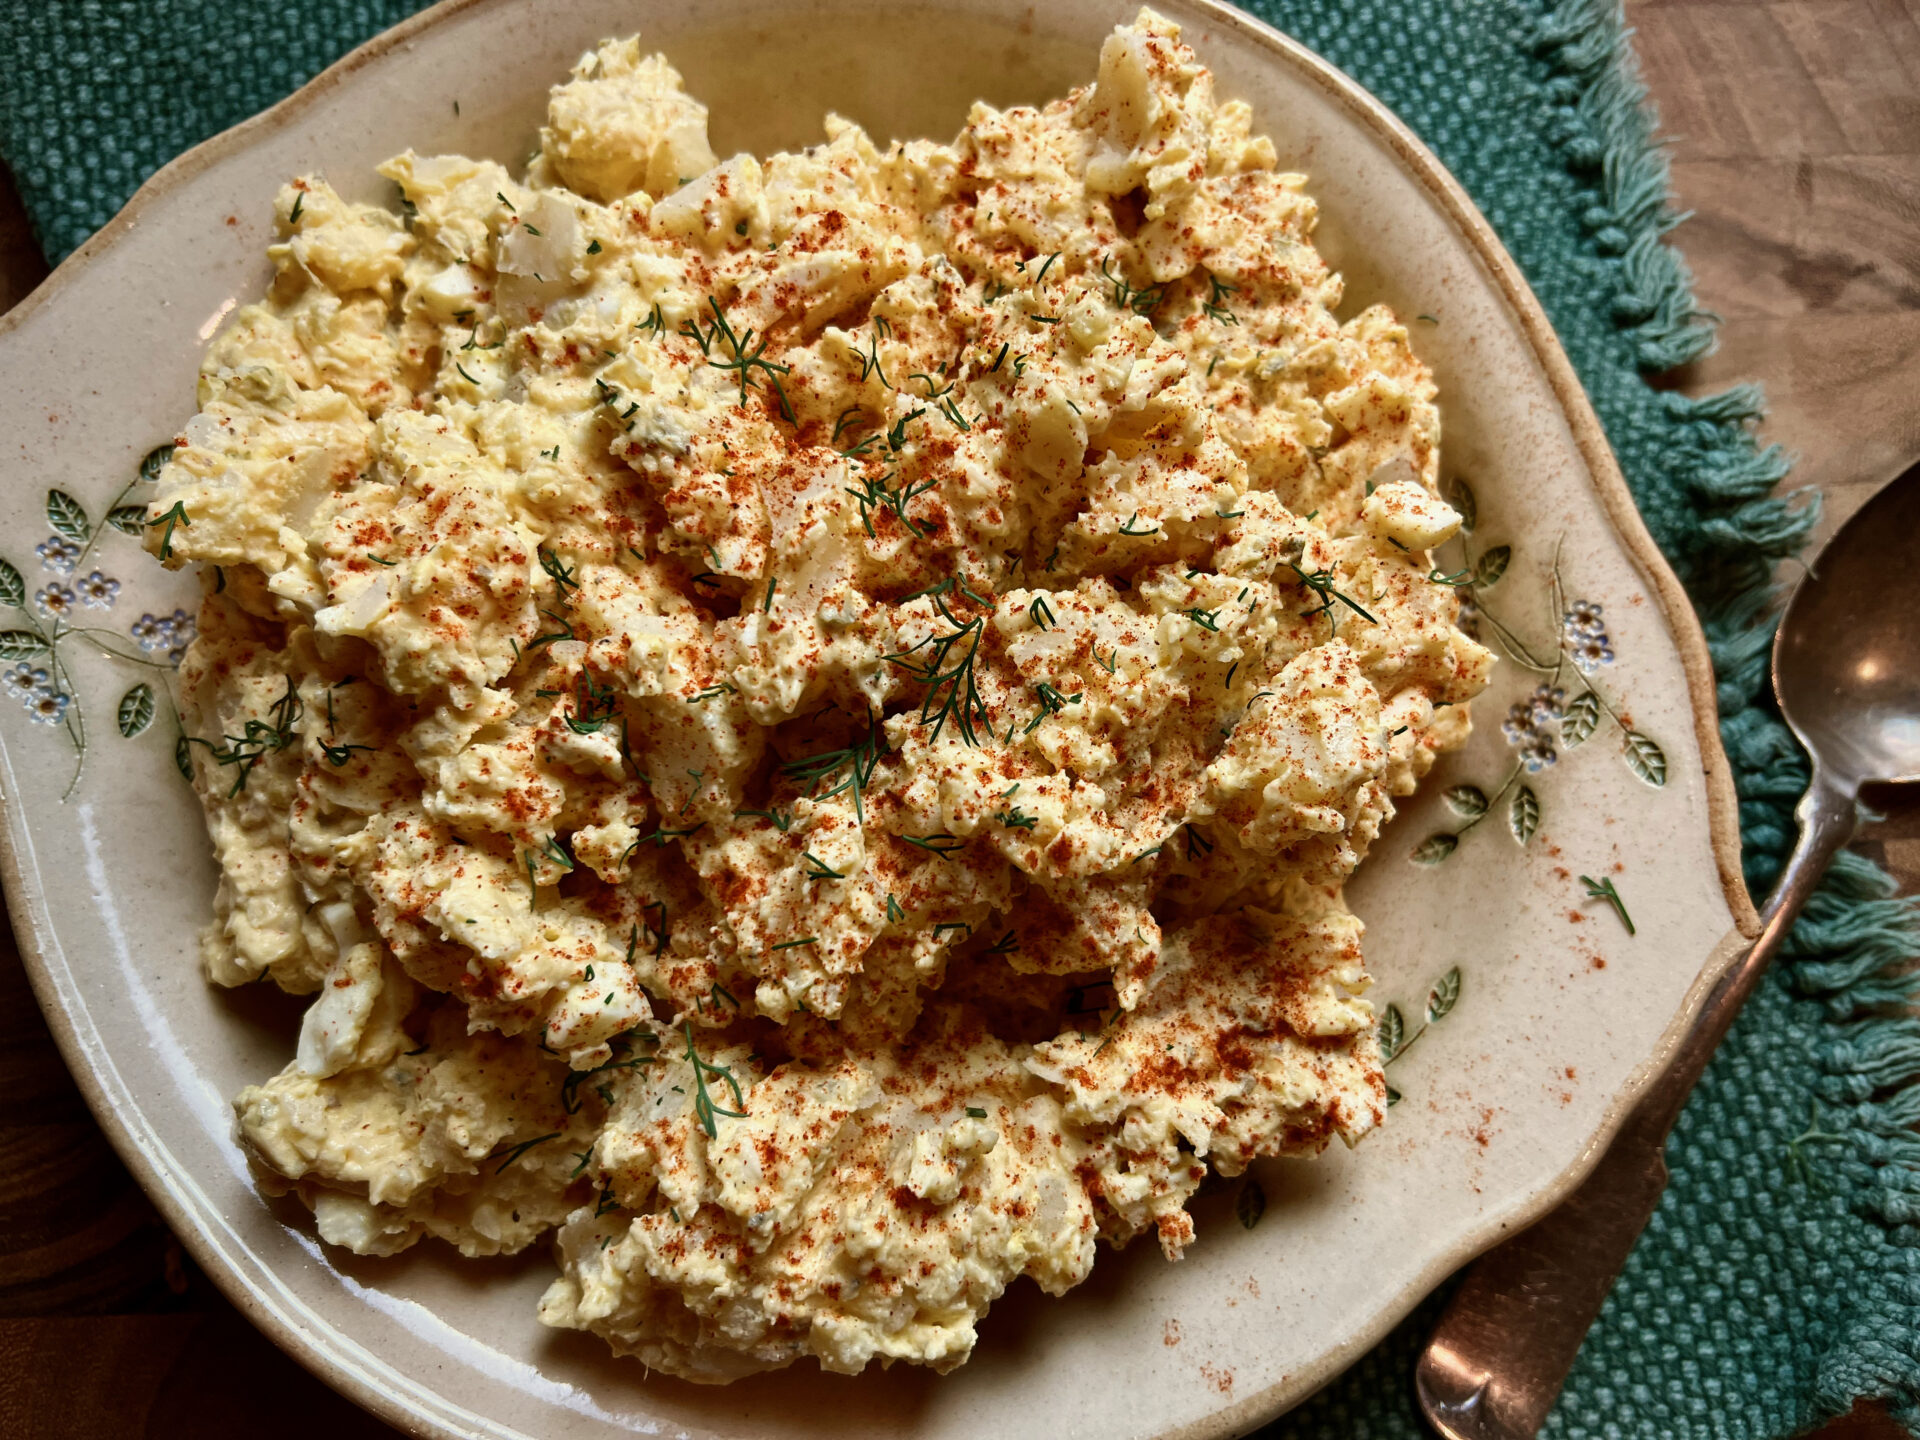 Learn how to make potato salad, southern style! Perfect for any picnic, potluck or cookout. Plus, this potato salad only gets better with a night in the fridge!